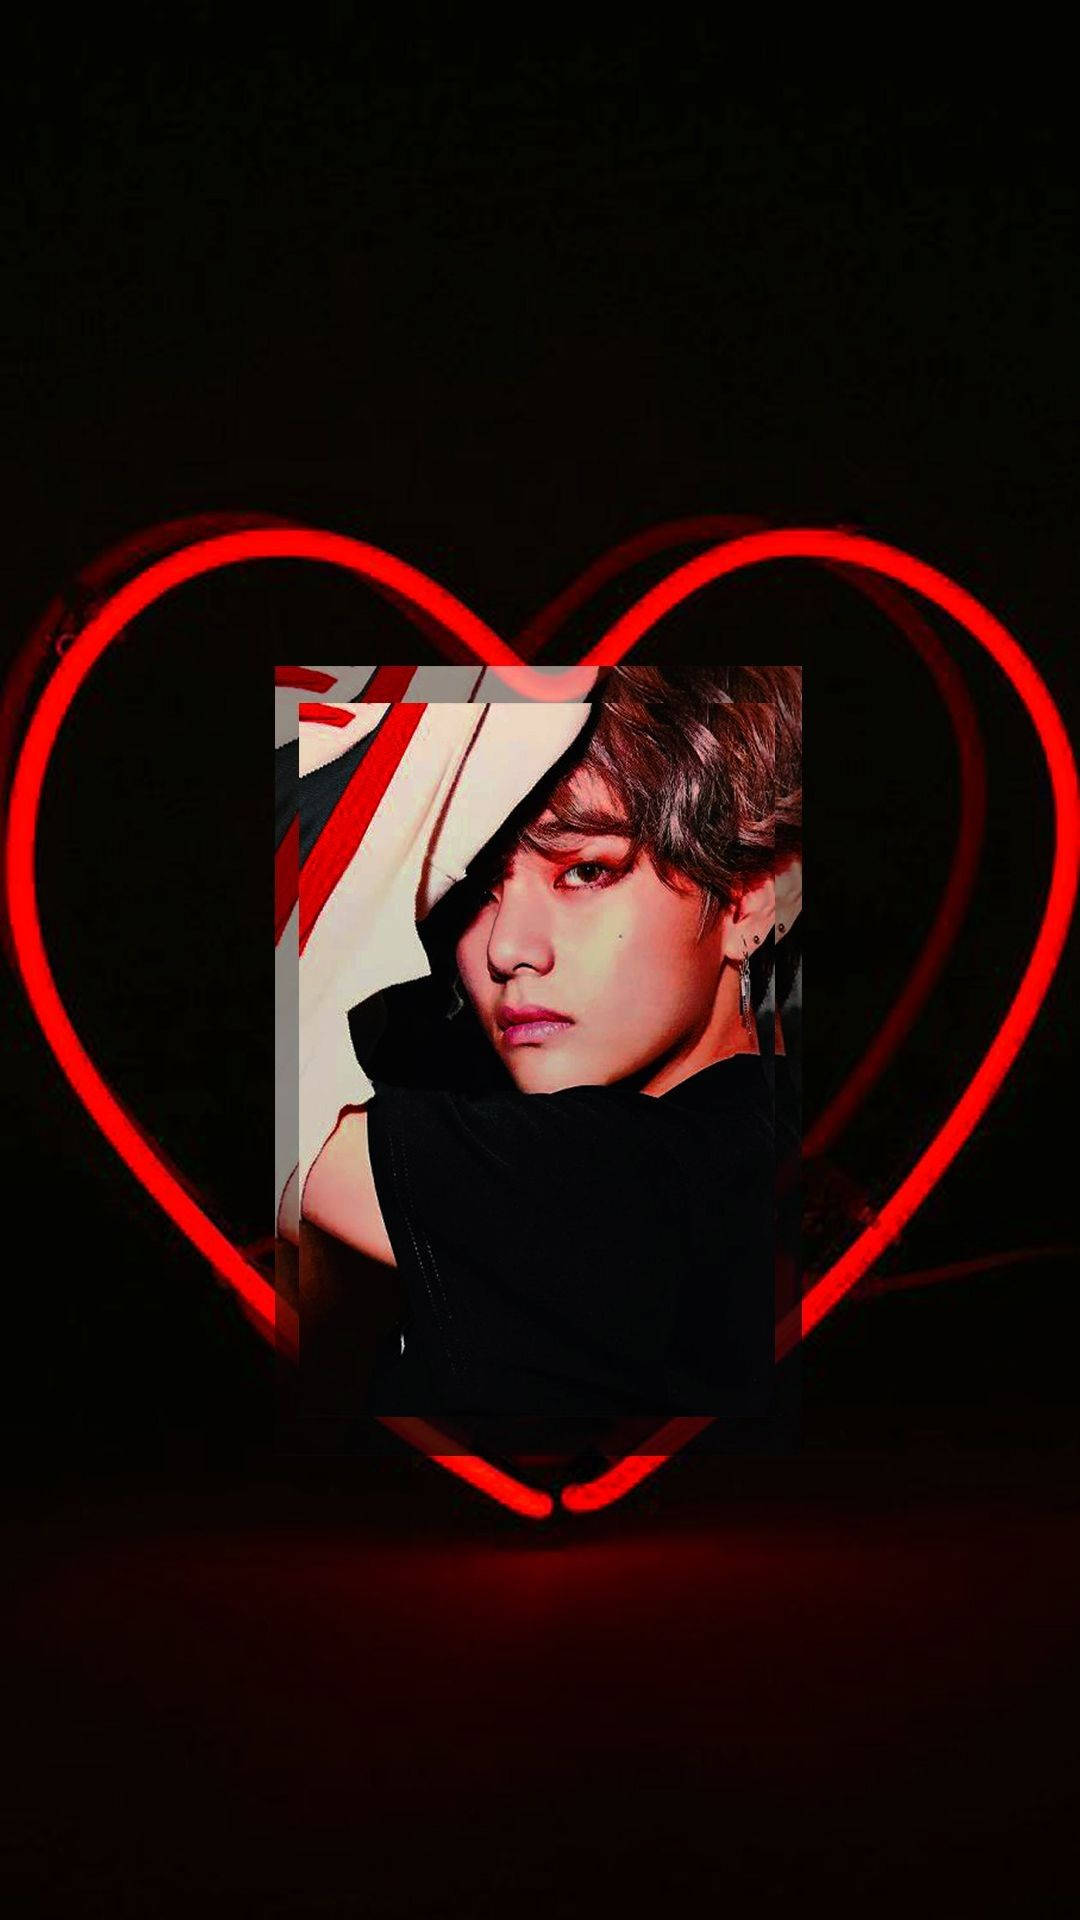 Kim Taehyung In Red Aesthetic Heart Background